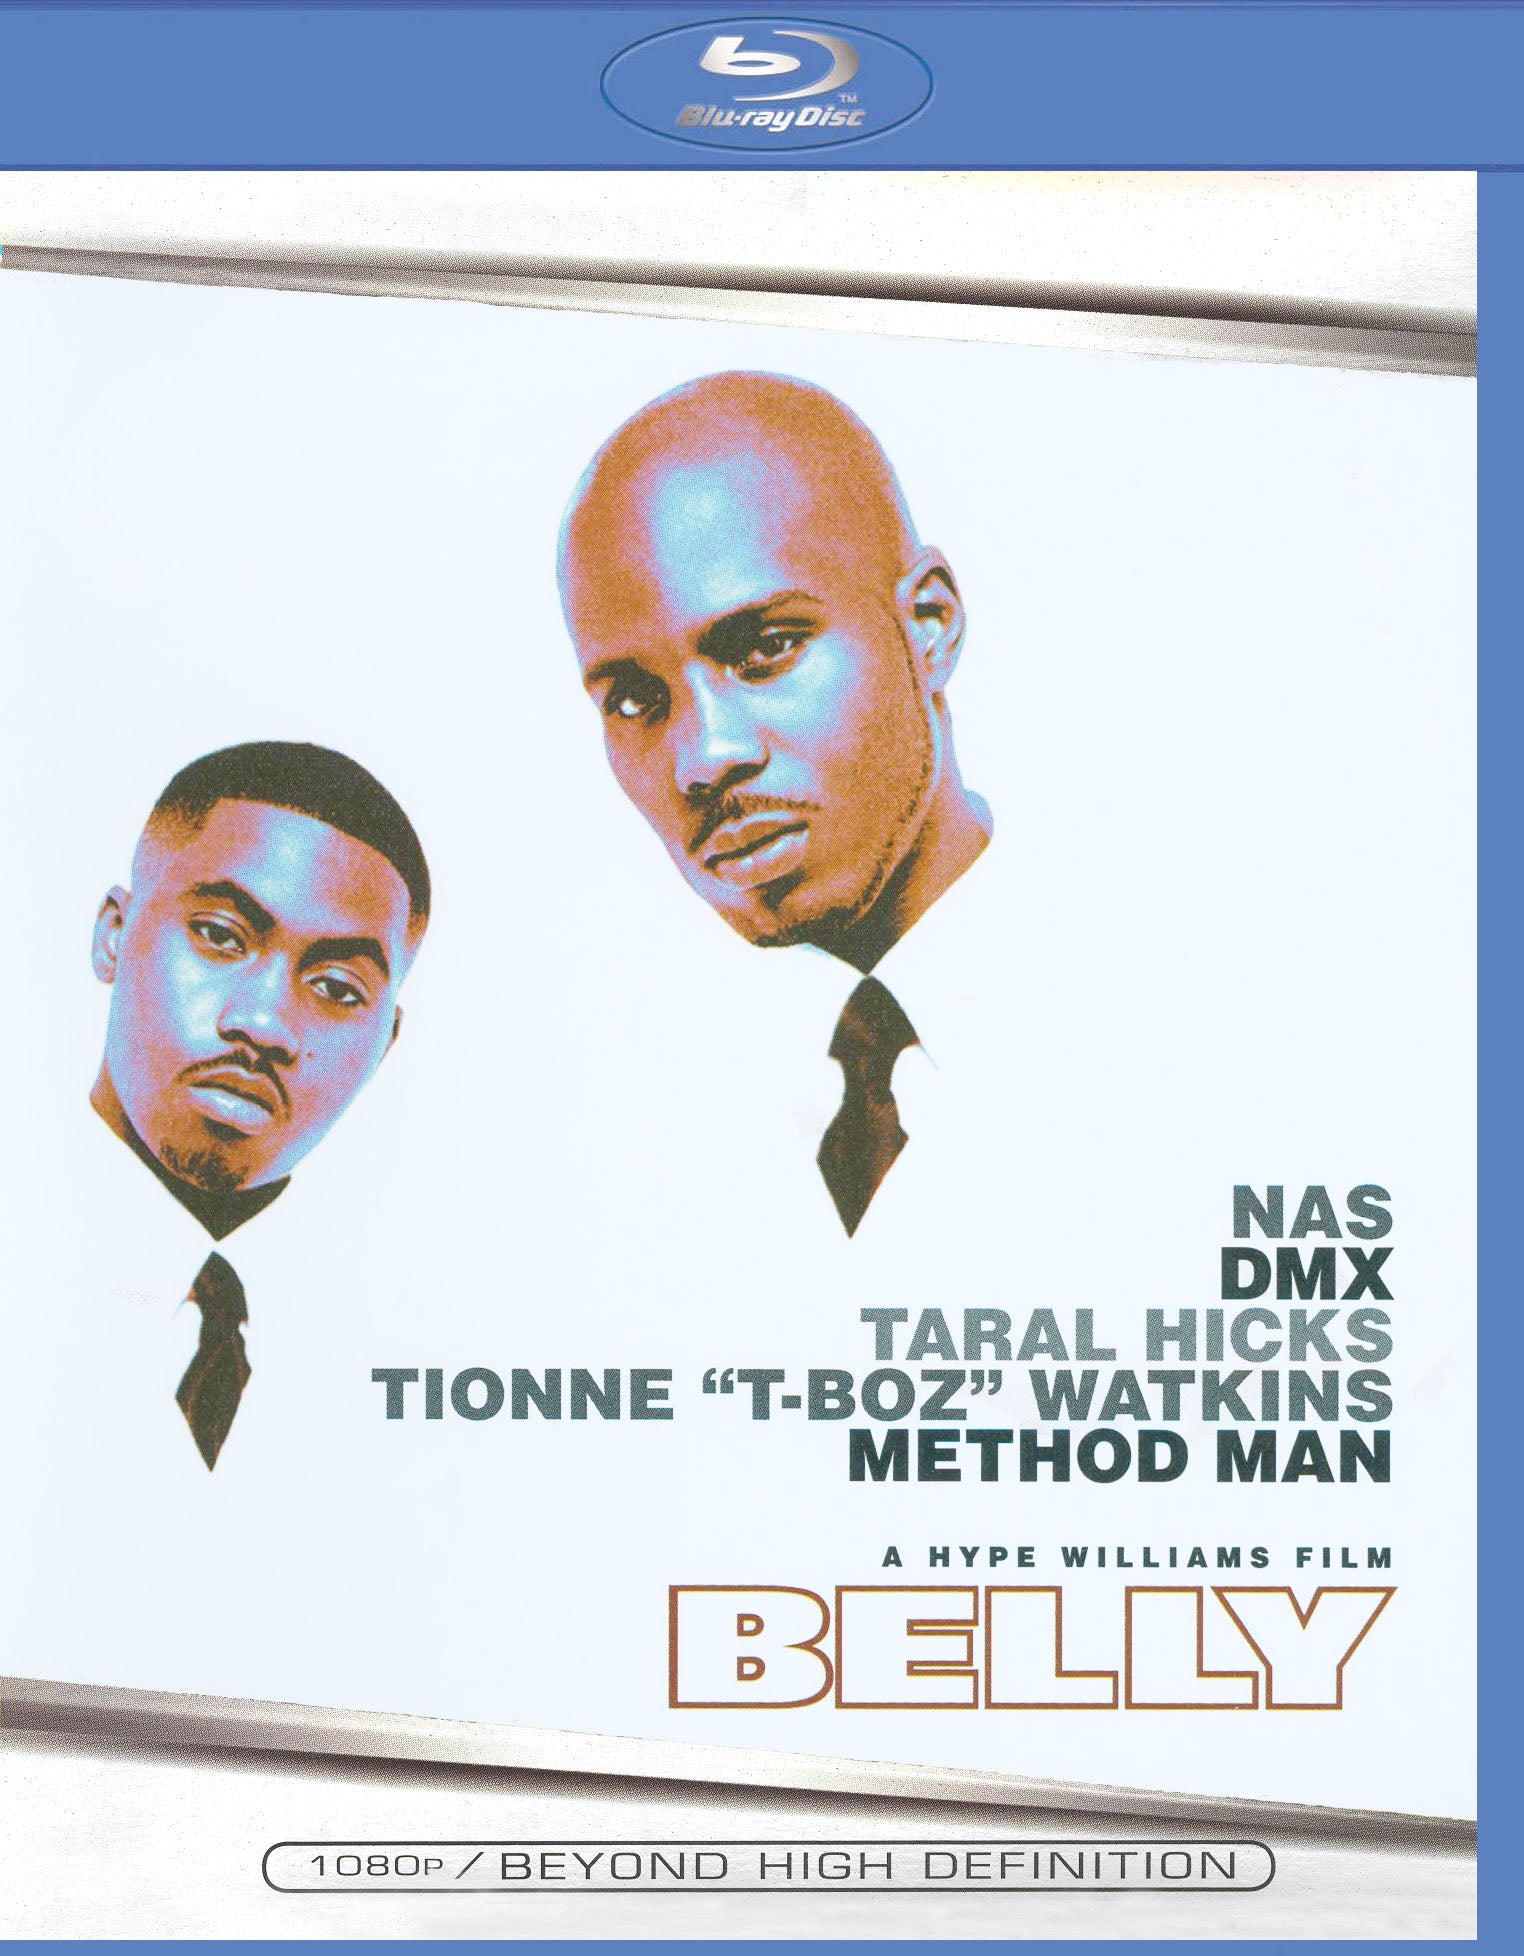 Belly [Blu-ray] cover art